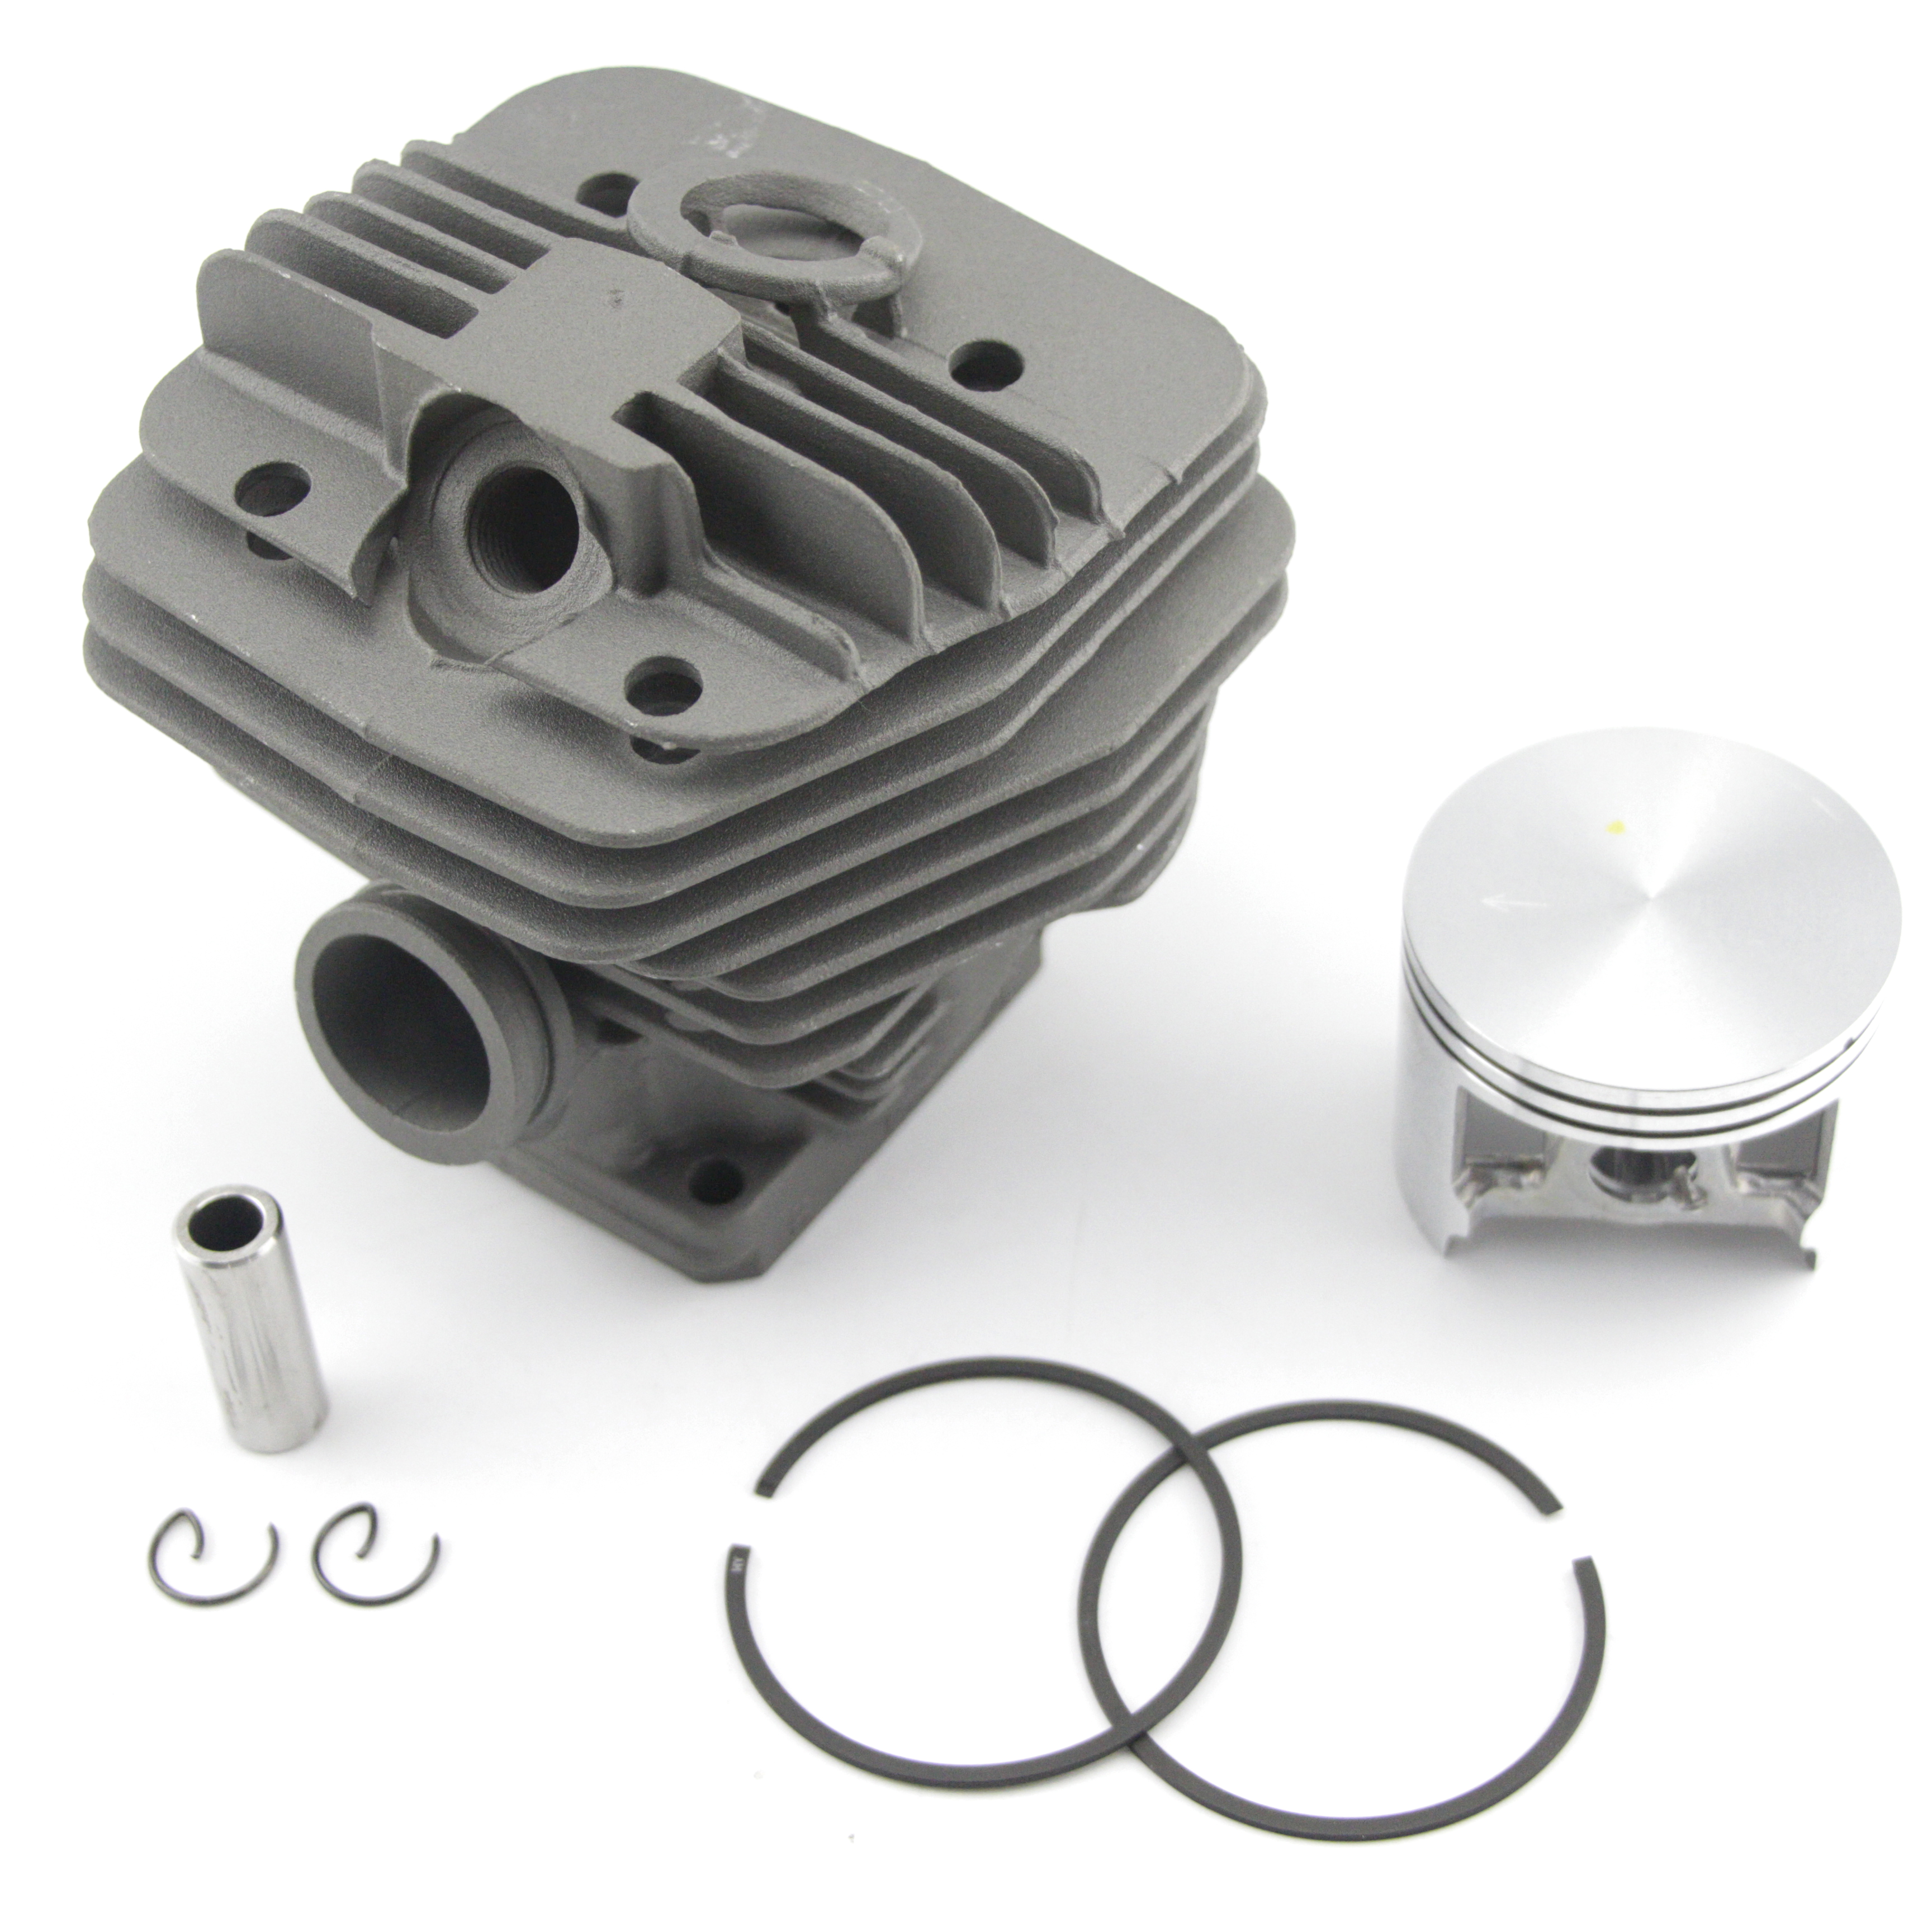 54mm Cylinder Piston Kit For Stihl 066 MS660 Chainsaw 1122 020 1209 With Pin Ring Circlip